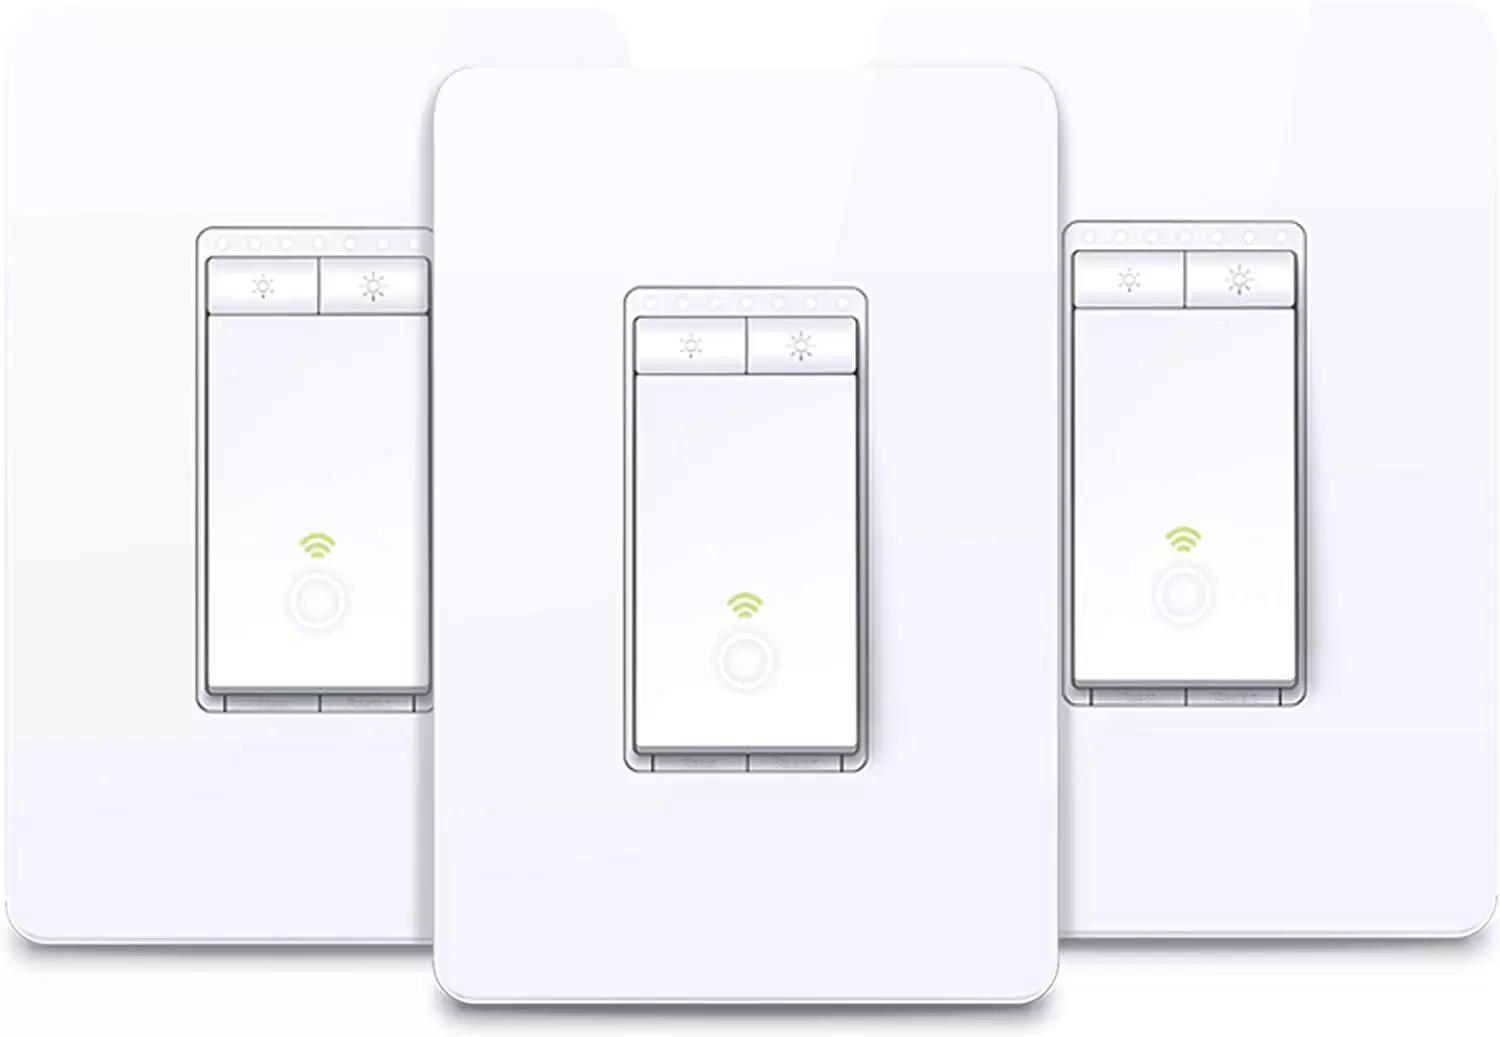 3 TP-Link HS220P3 Kasa Smart Dimmer WiFi Light Switches for $54.99 Shipped